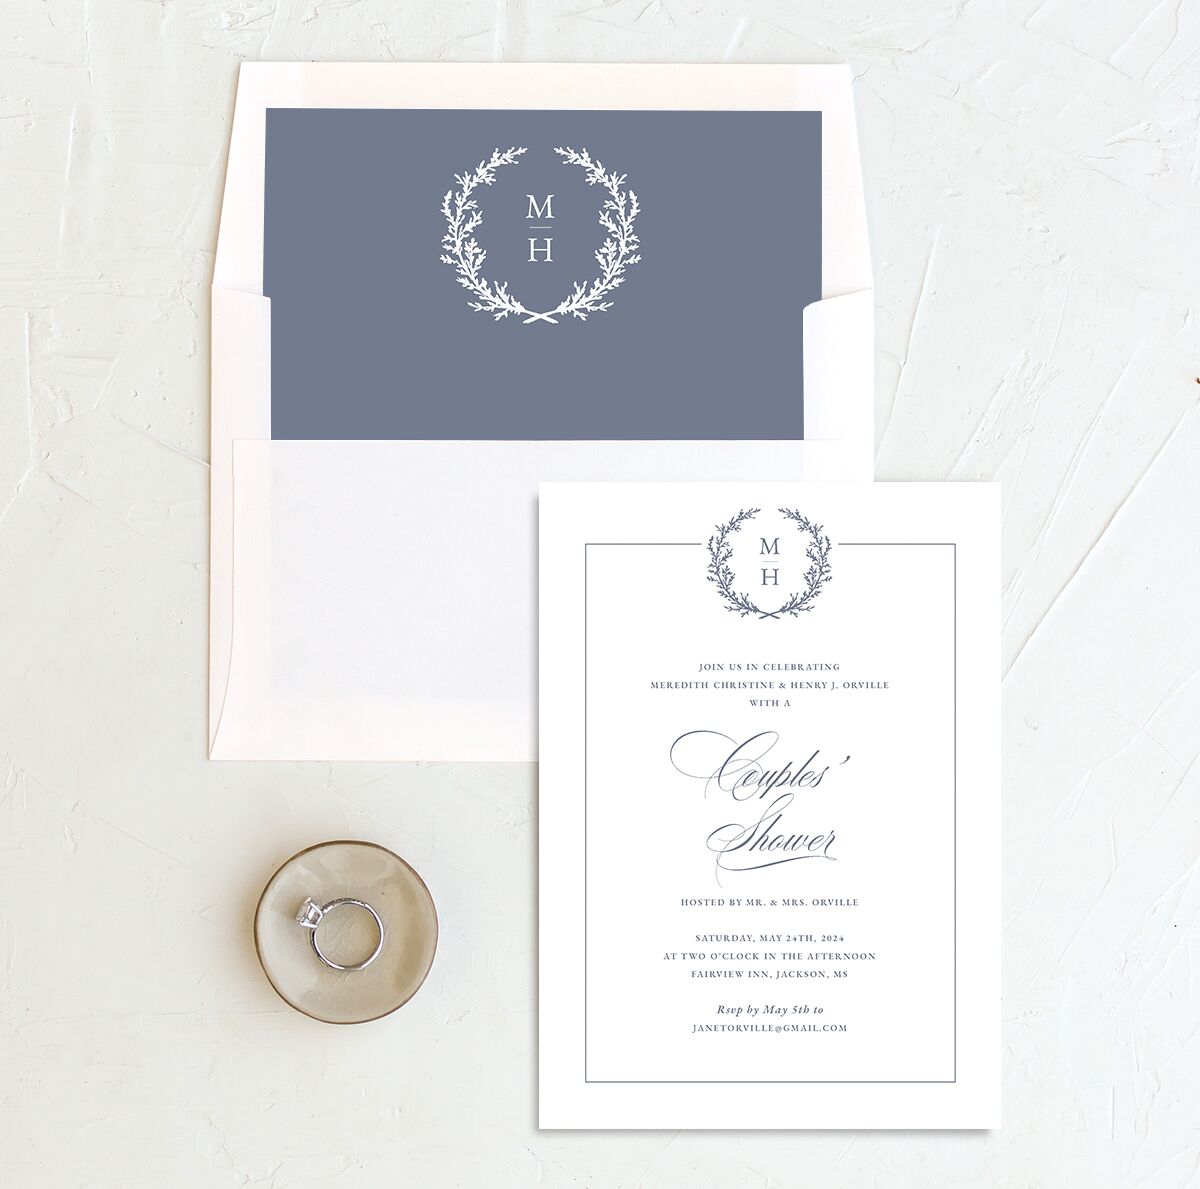 Classic Garland Bridal Shower Invitations envelope-and-liner in blue